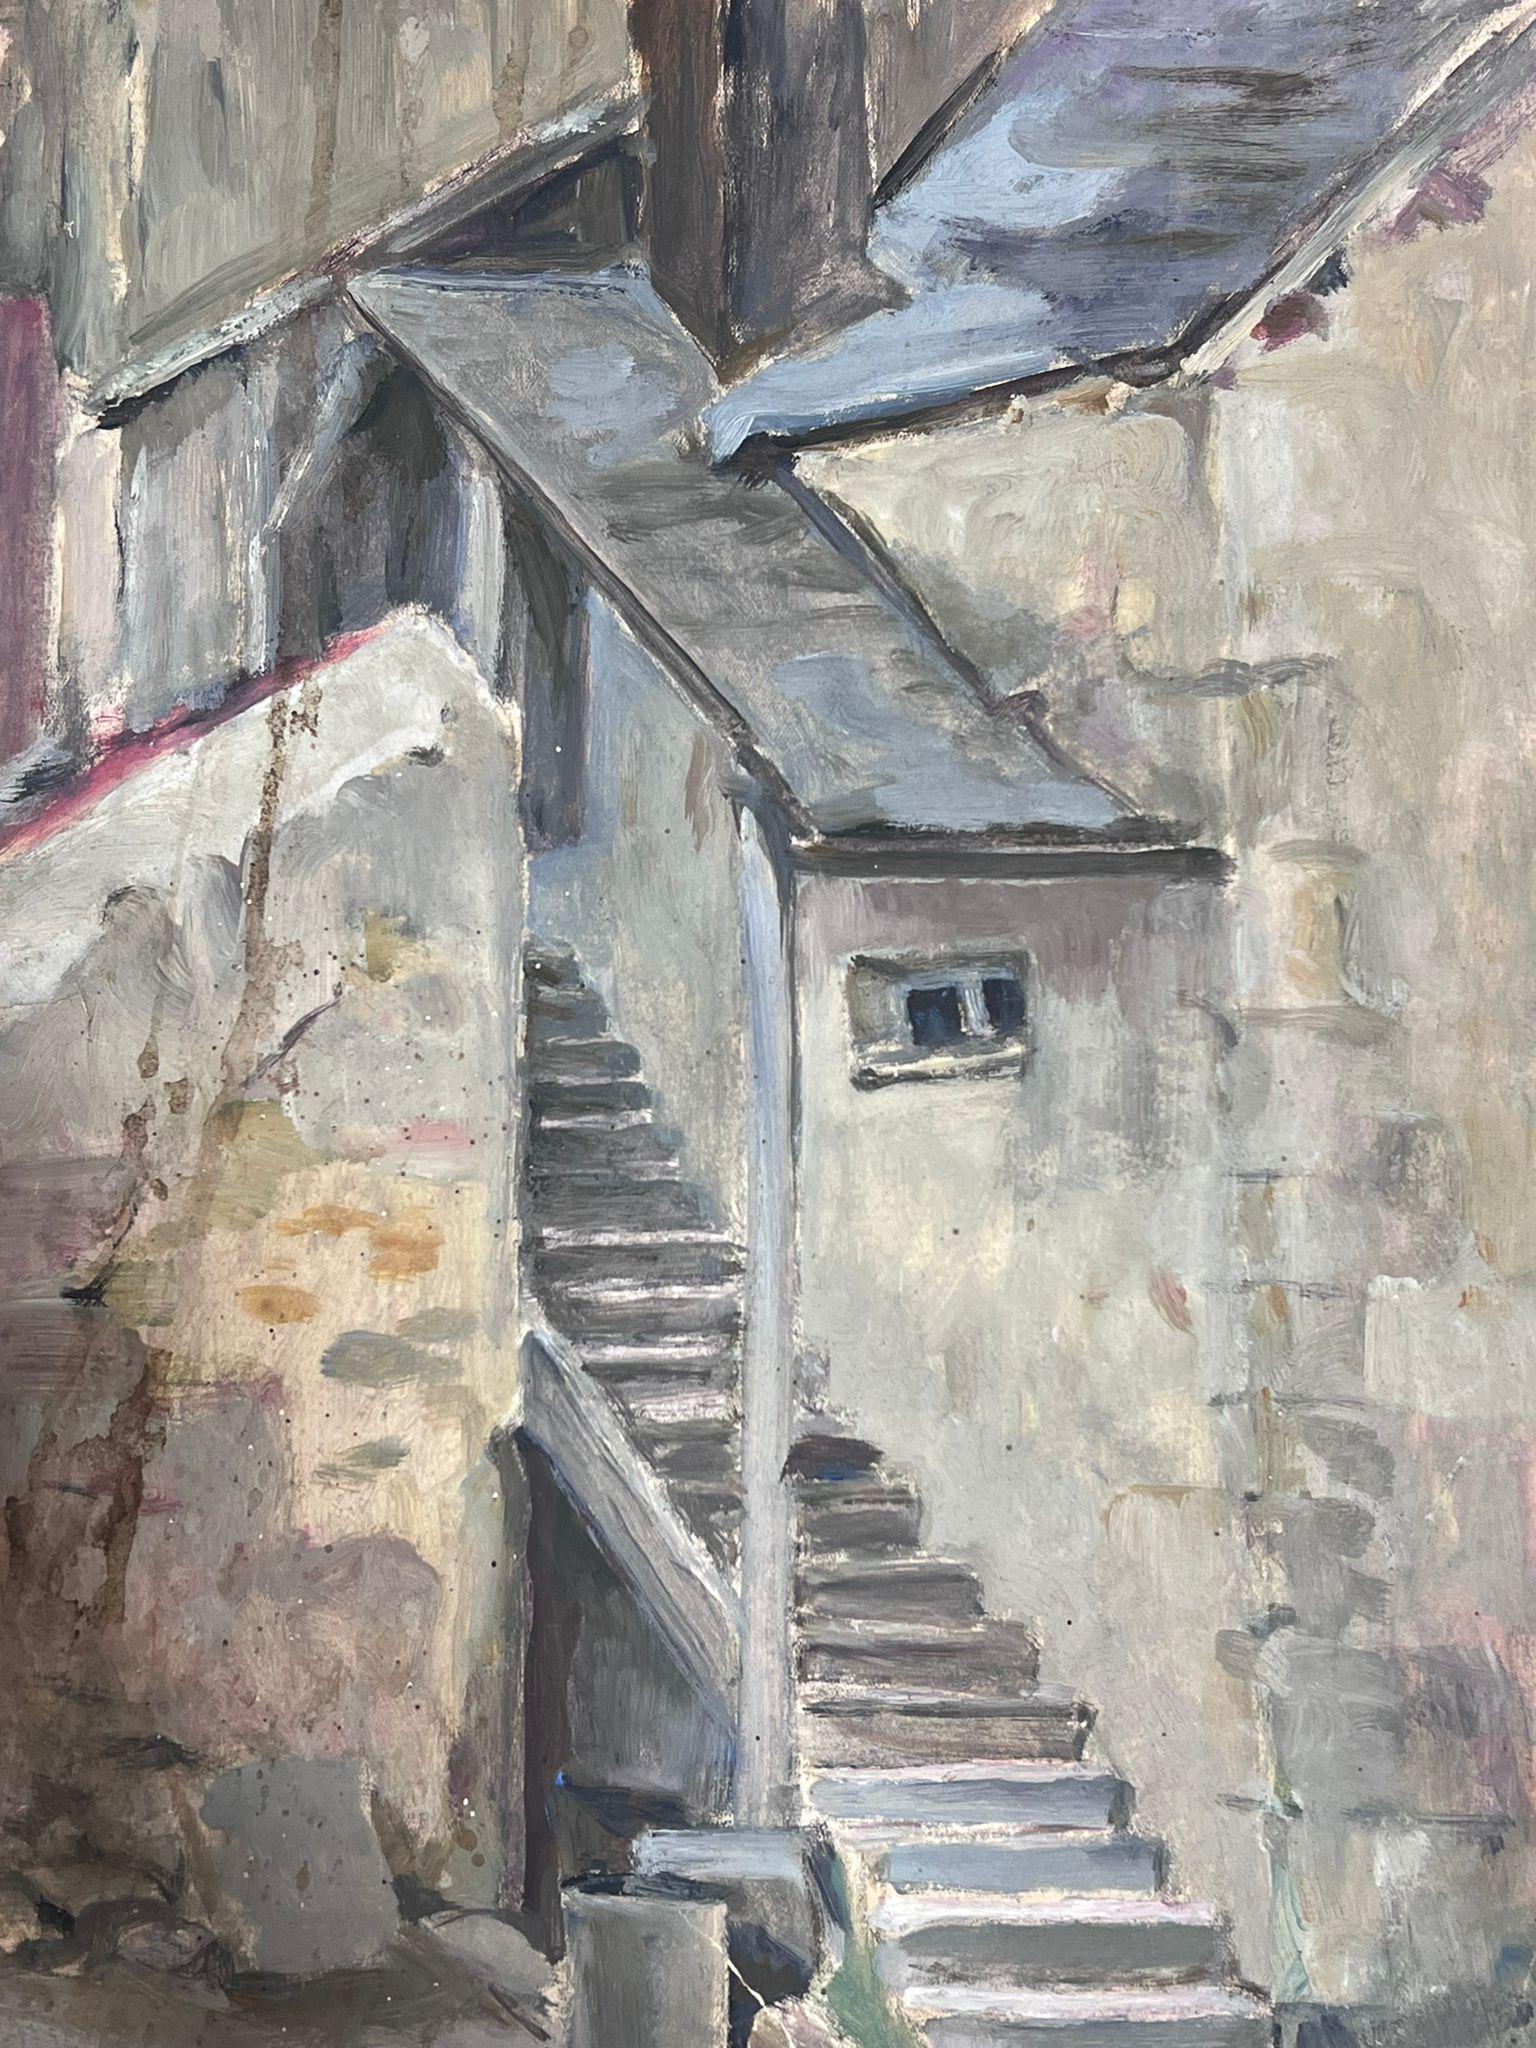 Grey Stone Stair Way 
by Louise Alix, French 1950's Impressionist 
gouache on artist paper, unframed
painting: 14.5 x 10.5 inches
provenance: from a large private collection of this artists work in Northern France
condition: original, good and sound